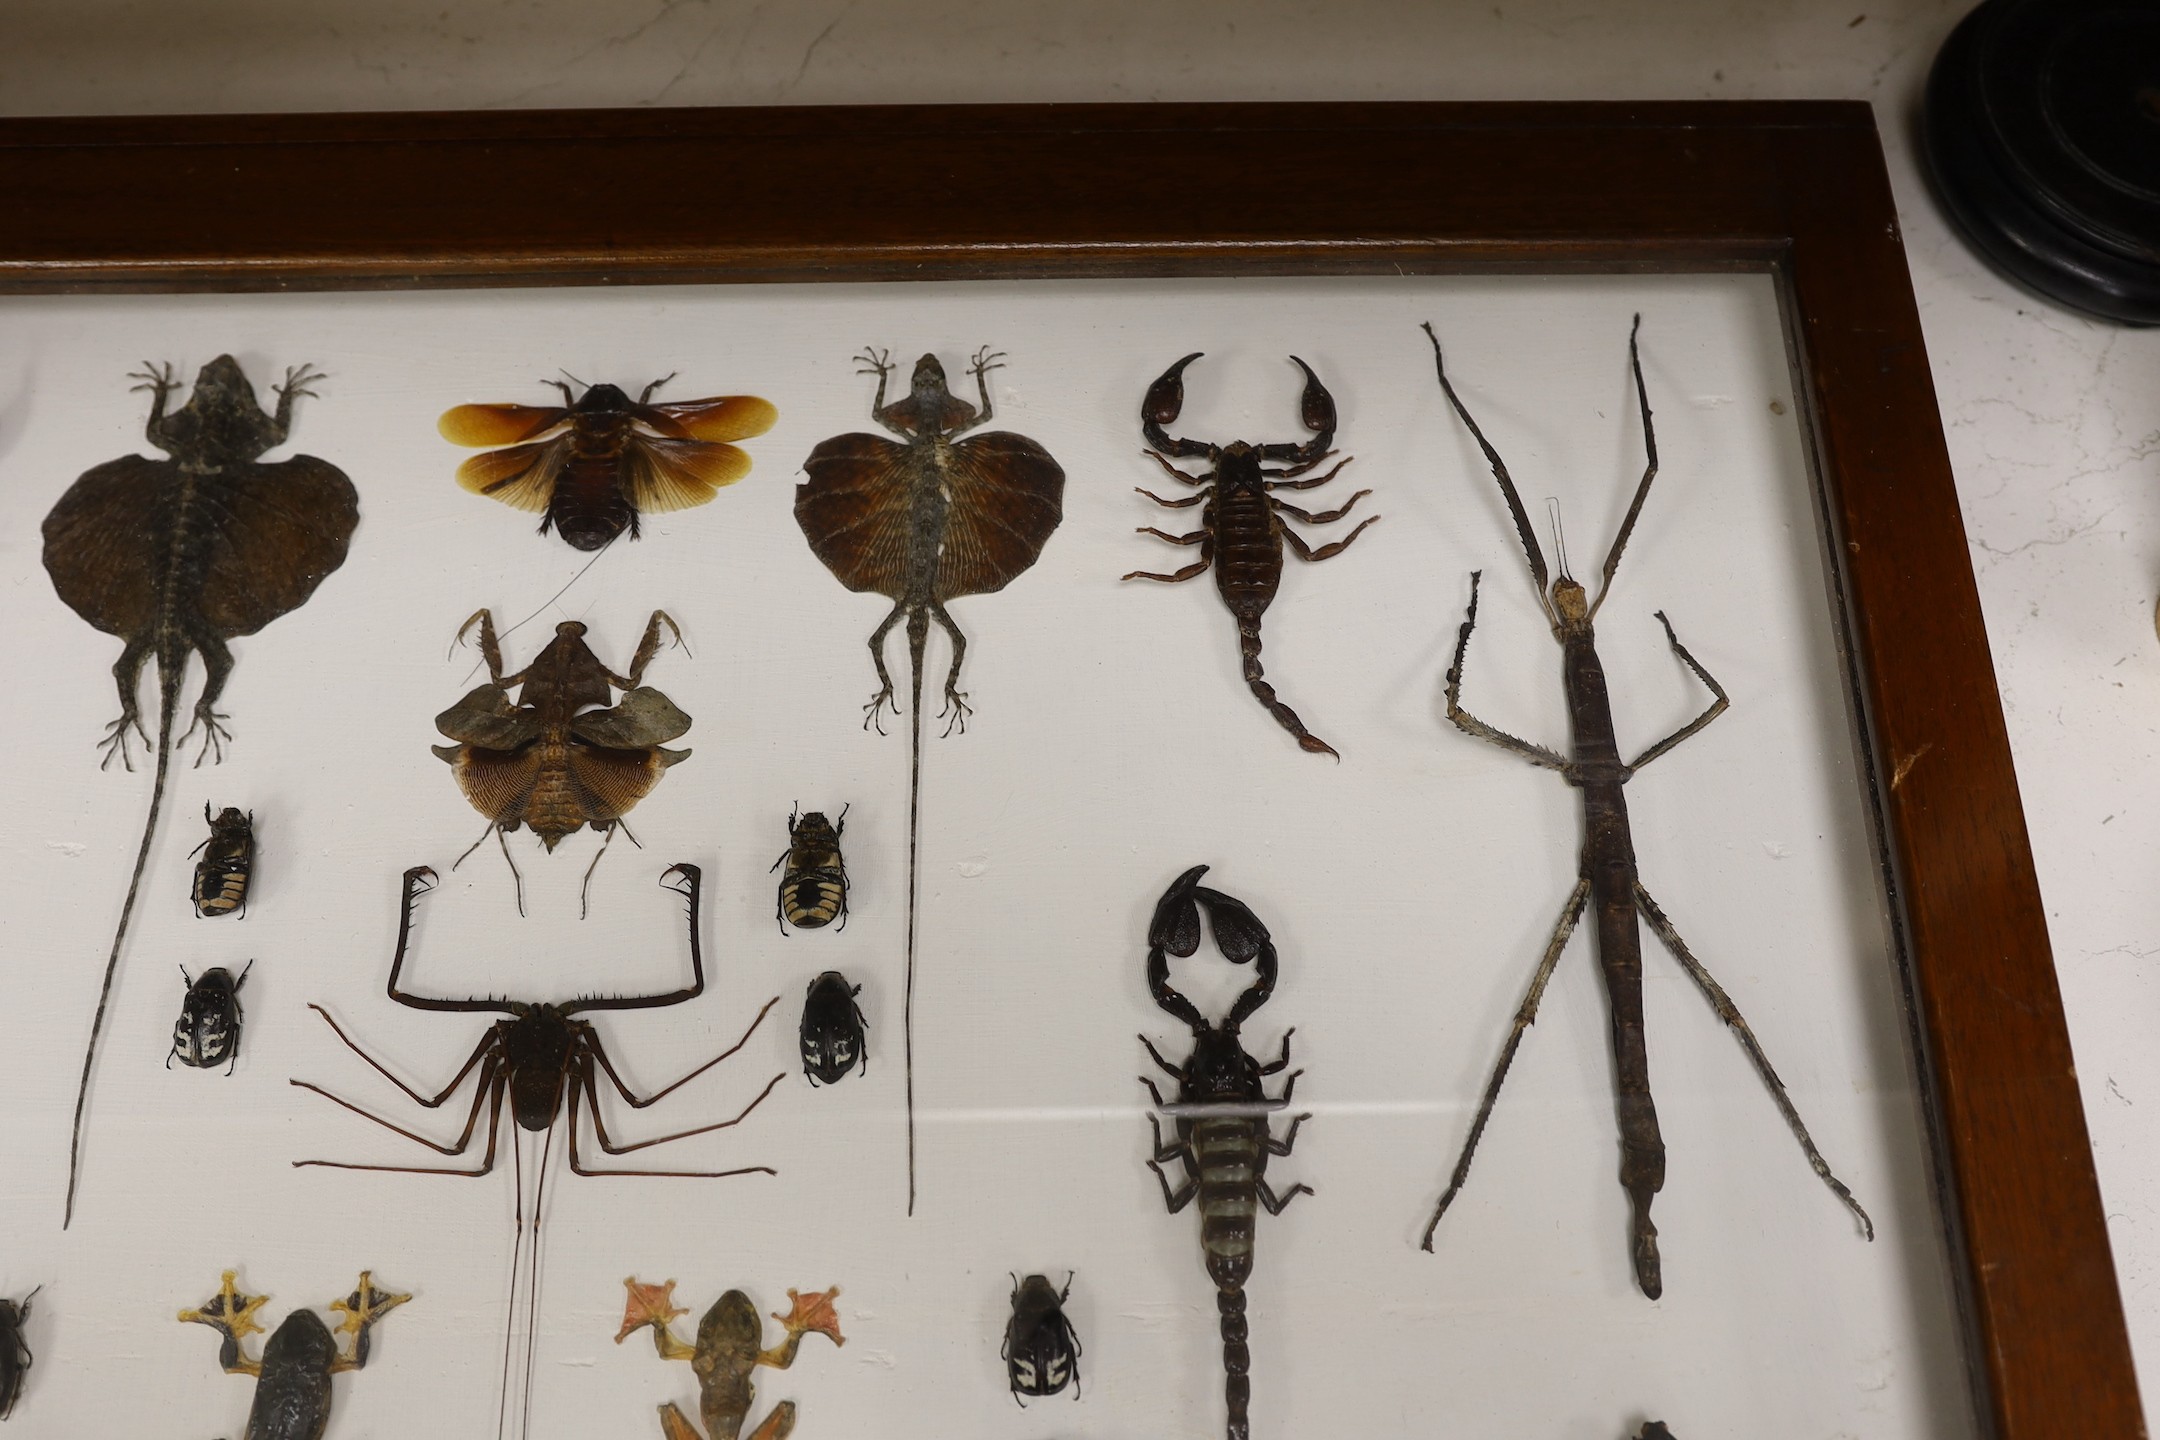 Entomology- a cased taxidermy display of tree frogs, scorpions, stick insects, beetles and flying lizards